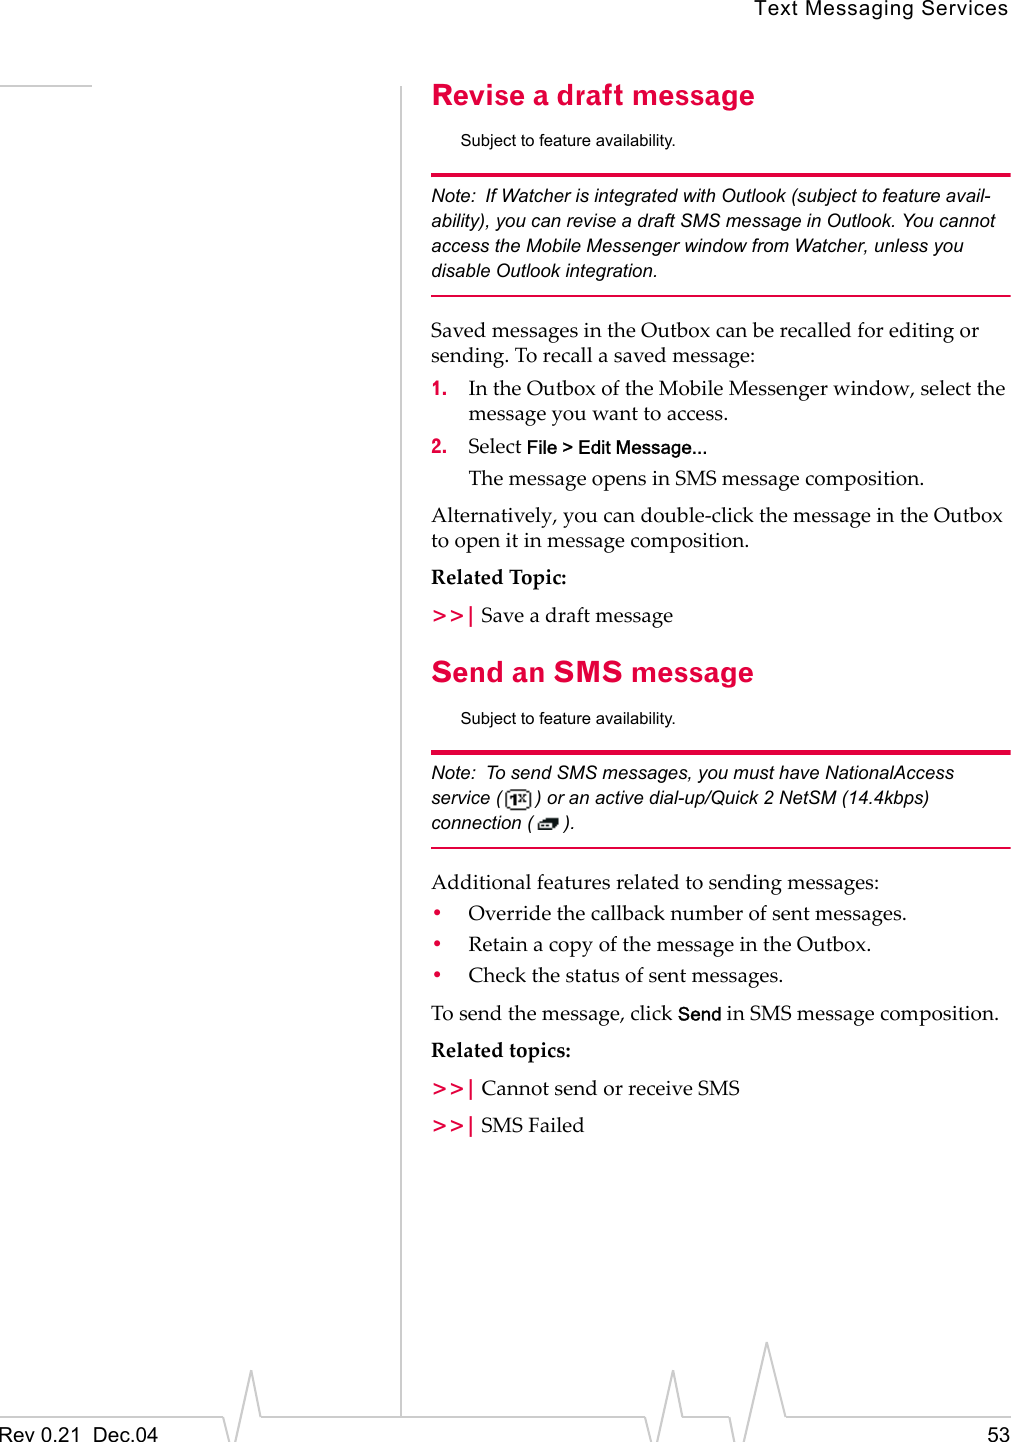 Text Messaging ServicesRev 0.21  Dec.04 53Revise a draft messageSubject to feature availability.Note: If Watcher is integrated with Outlook (subject to feature avail-ability), you can revise a draft SMS message in Outlook. You cannot access the Mobile Messenger window from Watcher, unless you disable Outlook integration.Saved messages in the Outbox can be recalled for editing or sending. To recall a saved message:1. In the Outbox of the Mobile Messenger window, select the message you want to access.2. Select File &gt; Edit Message...The message opens in SMS message composition.Alternatively, you can double-click the message in the Outbox to open it in message composition.Related Topic:&gt;&gt;| Save a draft messageSend an SMS messageSubject to feature availability.Note: To send SMS messages, you must have NationalAccess service ( ) or an active dial-up/Quick 2 NetSM (14.4kbps) connection ( ).Additional features related to sending messages:•Override the callback number of sent messages.•Retain a copy of the message in the Outbox.•Check the status of sent messages.To send the message, click Send in SMS message composition.Related topics:&gt;&gt;| Cannot send or receive SMS&gt;&gt;| SMS Failed